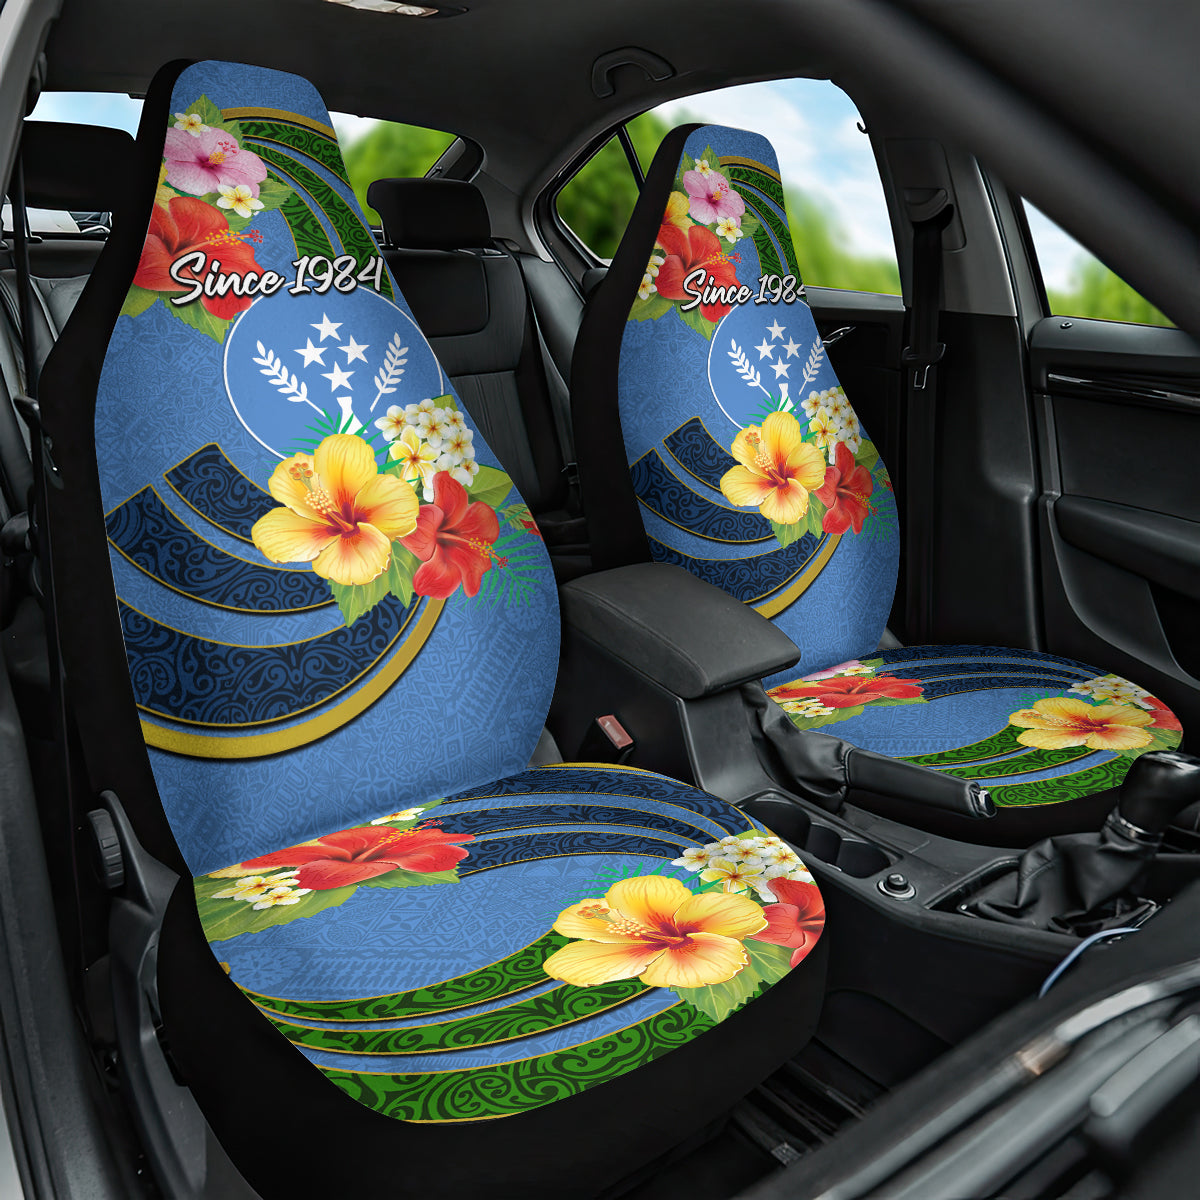 Kosrae Constitution Day Car Seat Cover Hibiscus Mix Maori Tattoo Pattern LT03 One Size Blue - Polynesian Pride